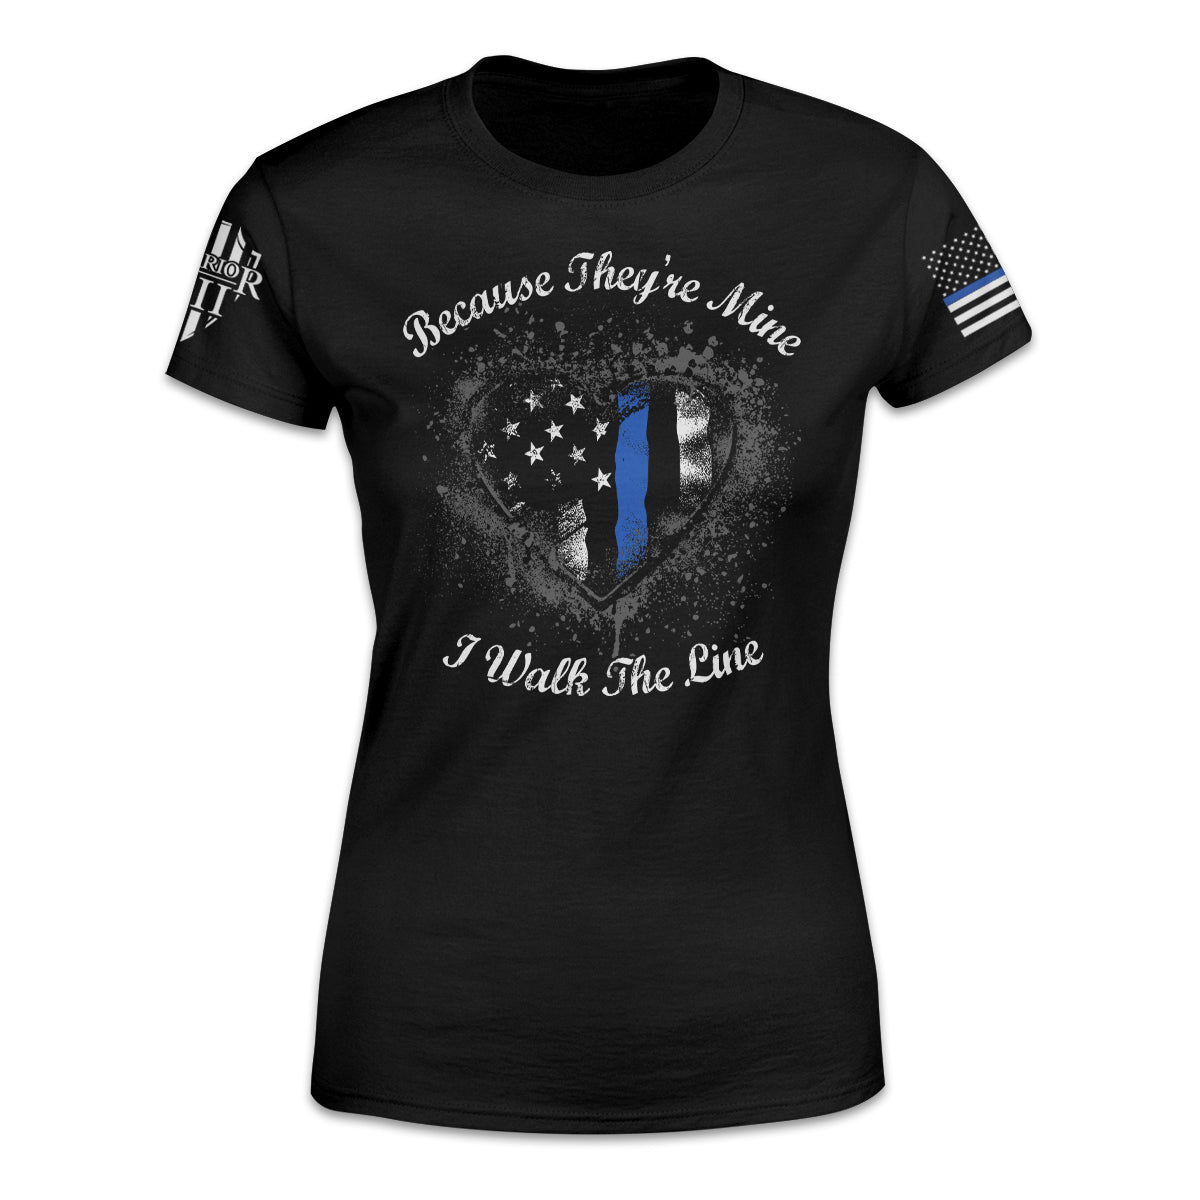 A black women's thin blue line t-shirt with the words "Because they're mine I walk the line" printed on the front.